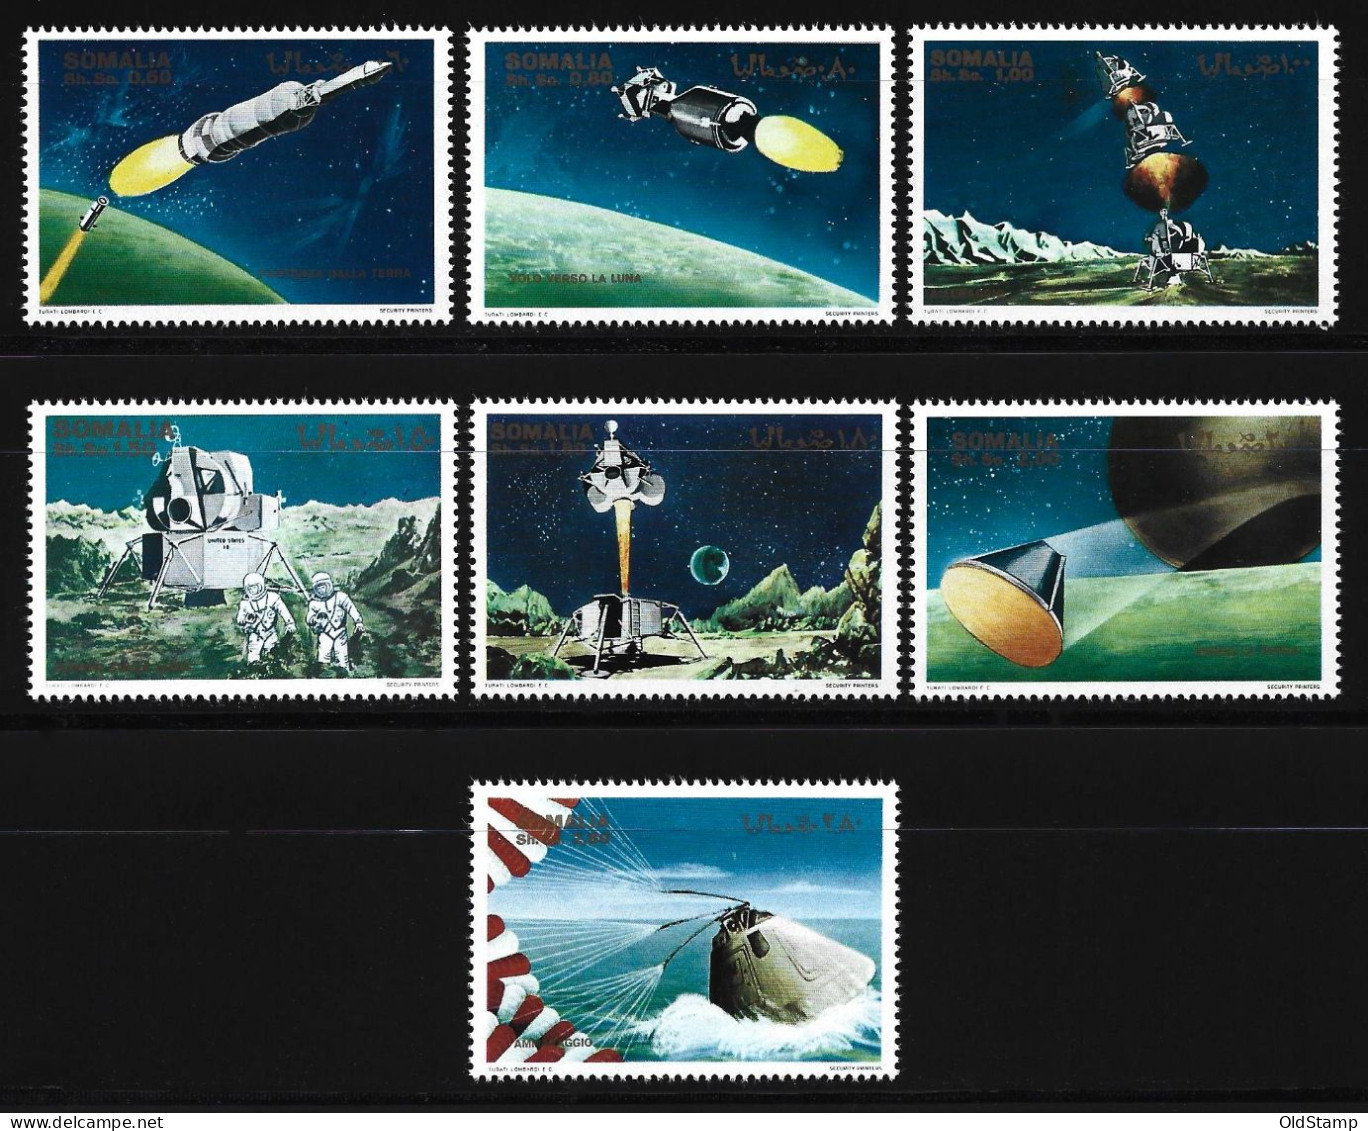 Somalia SPACE SPACESHIP PLANET ASTRONAUT STAR MNH LUXE Africa Stamps FULL SET - Verzamelingen